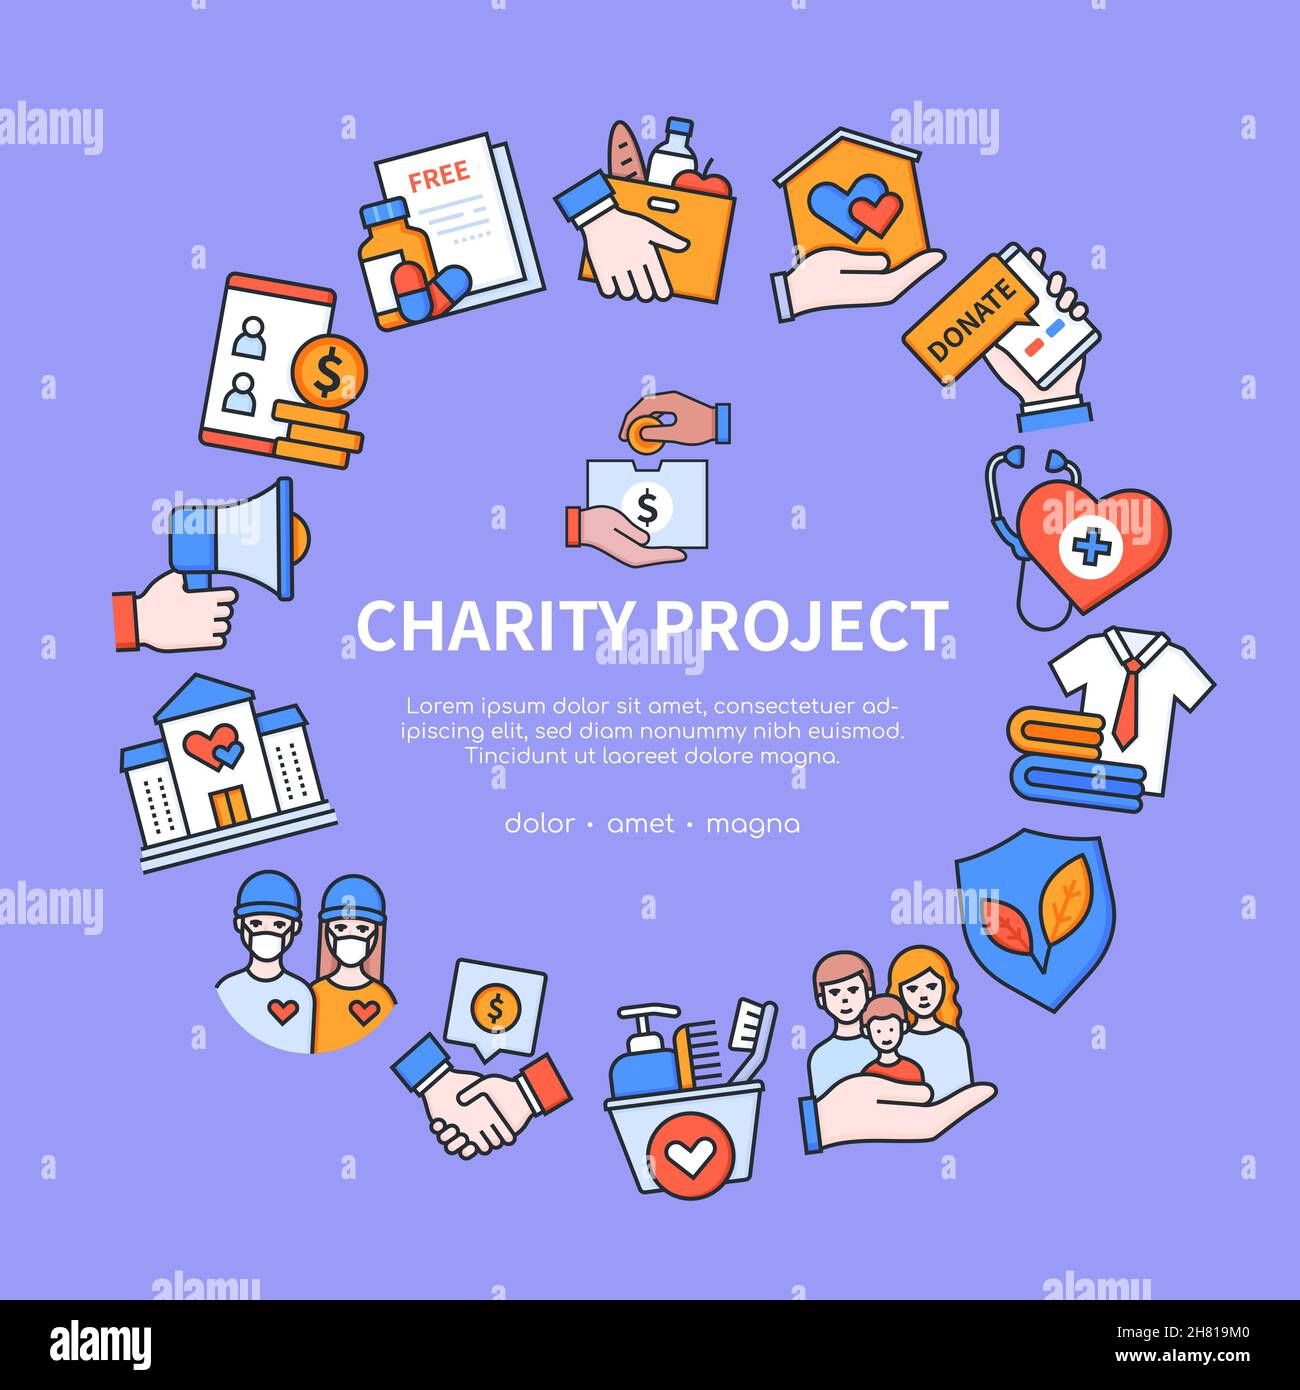 Charity project - colorful vector flat design style banner with copy space for text. Images are collected in a circle on a purple background. Donation Stock Vector